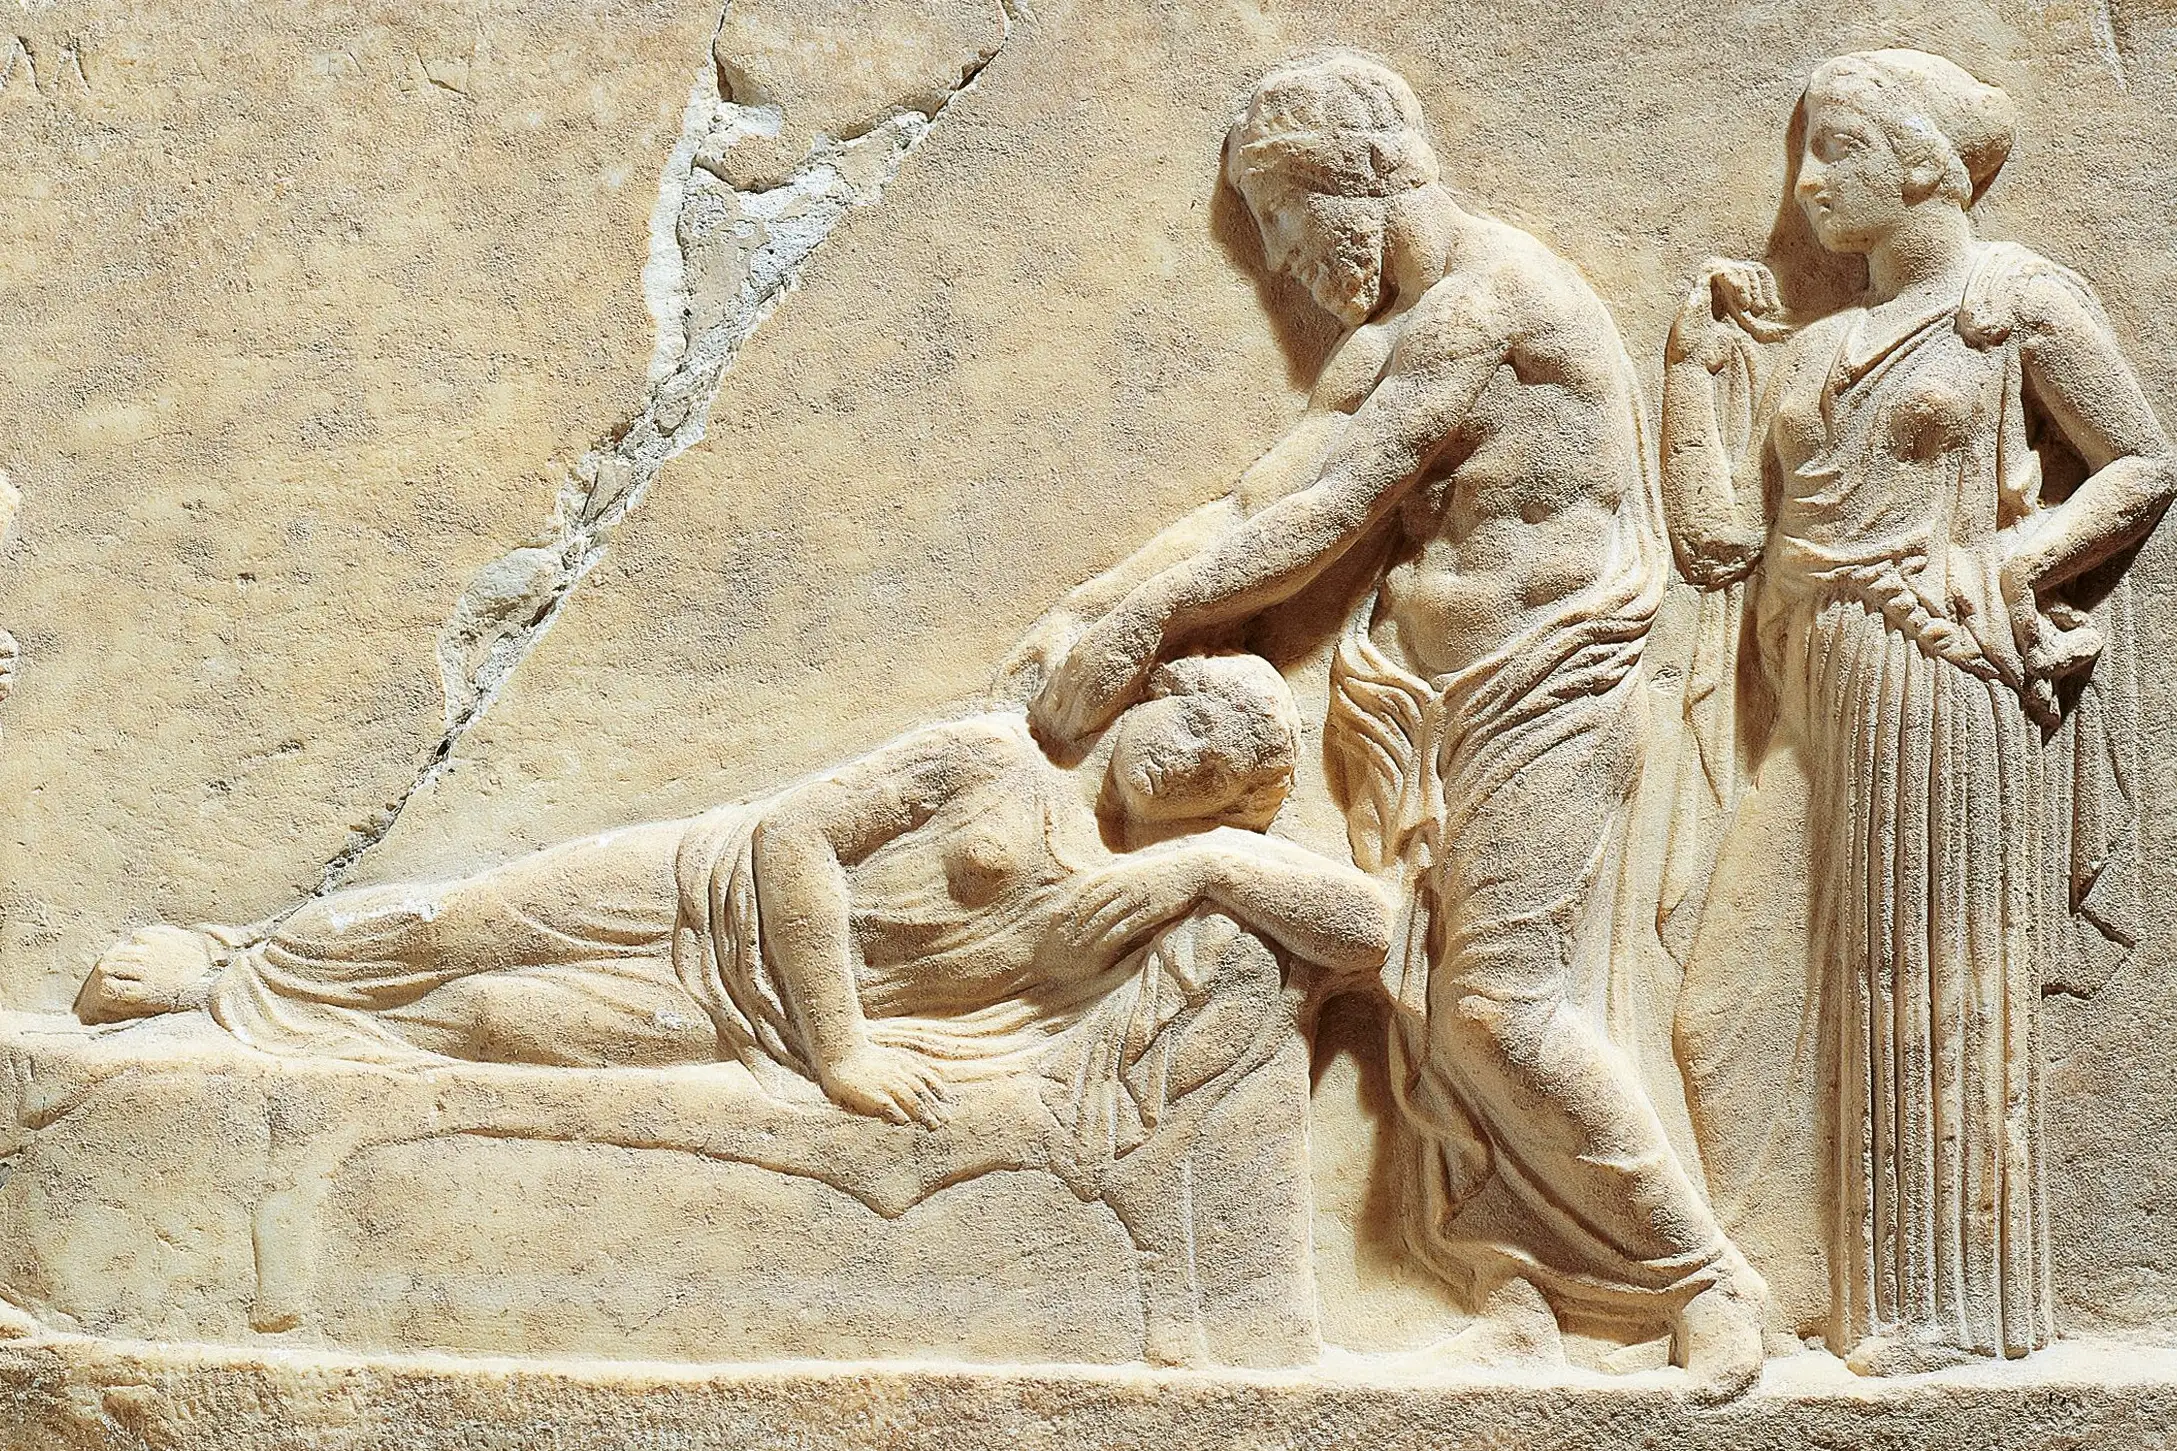 Marble relief depicting Asclepius or Hippocrates treating ill woman, from Greece, Il Pireo, Archaeological Museum, 5th Century B.C.